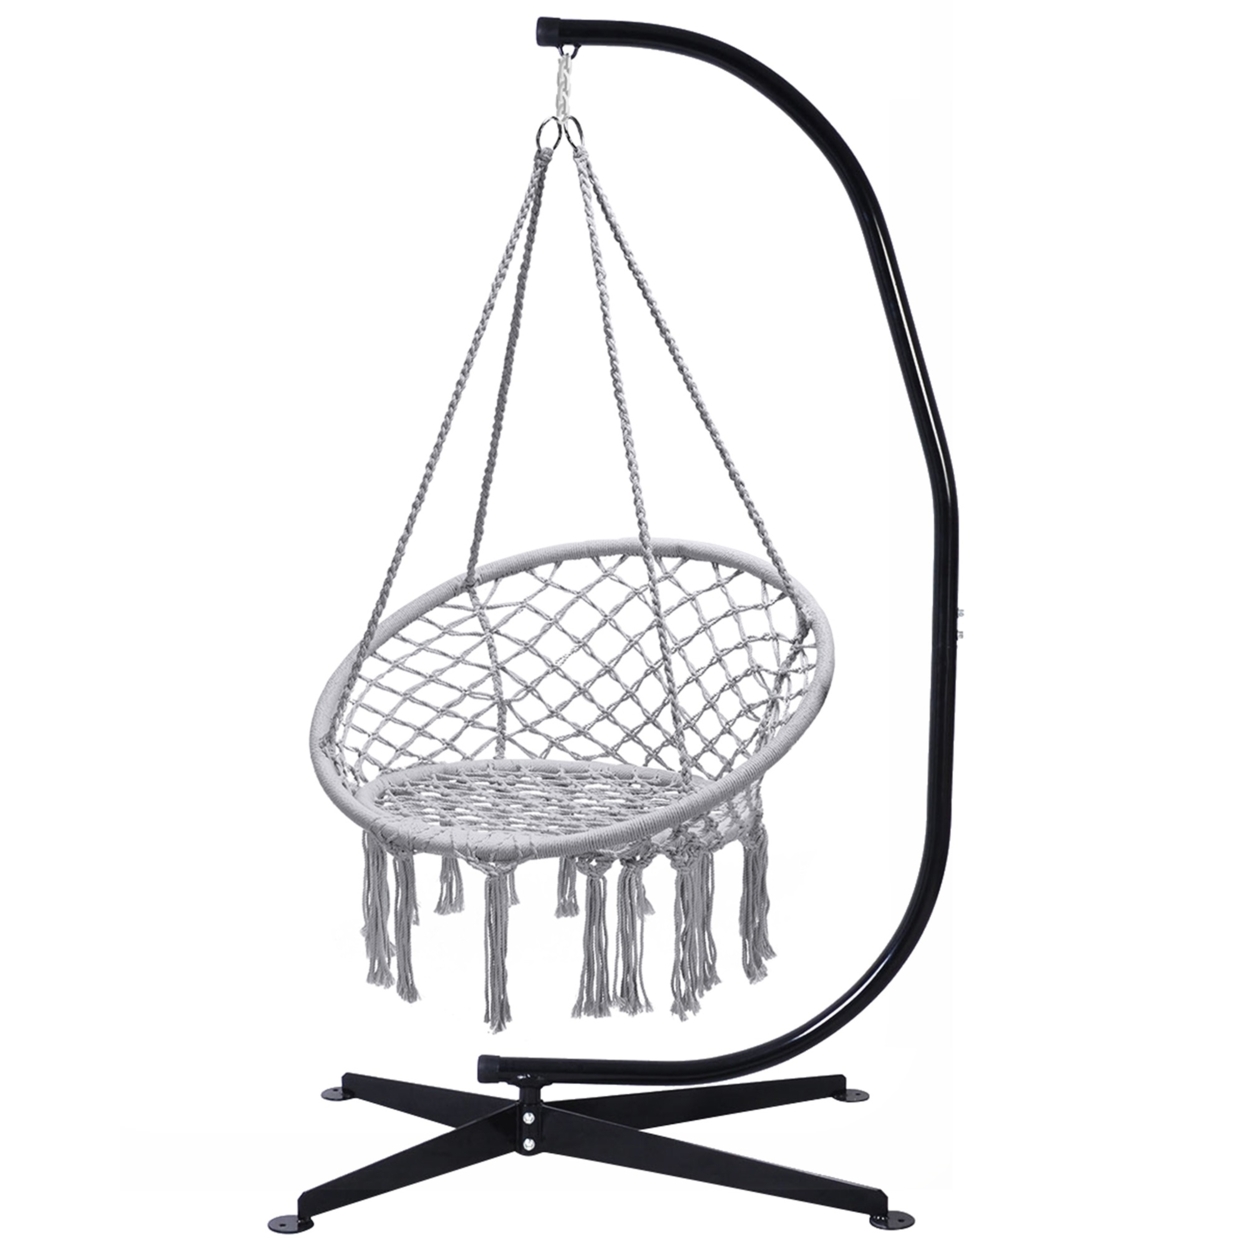 Hammock Chair Hanging Cotton Rope Macrame Swing Chair W/ Stand Gray